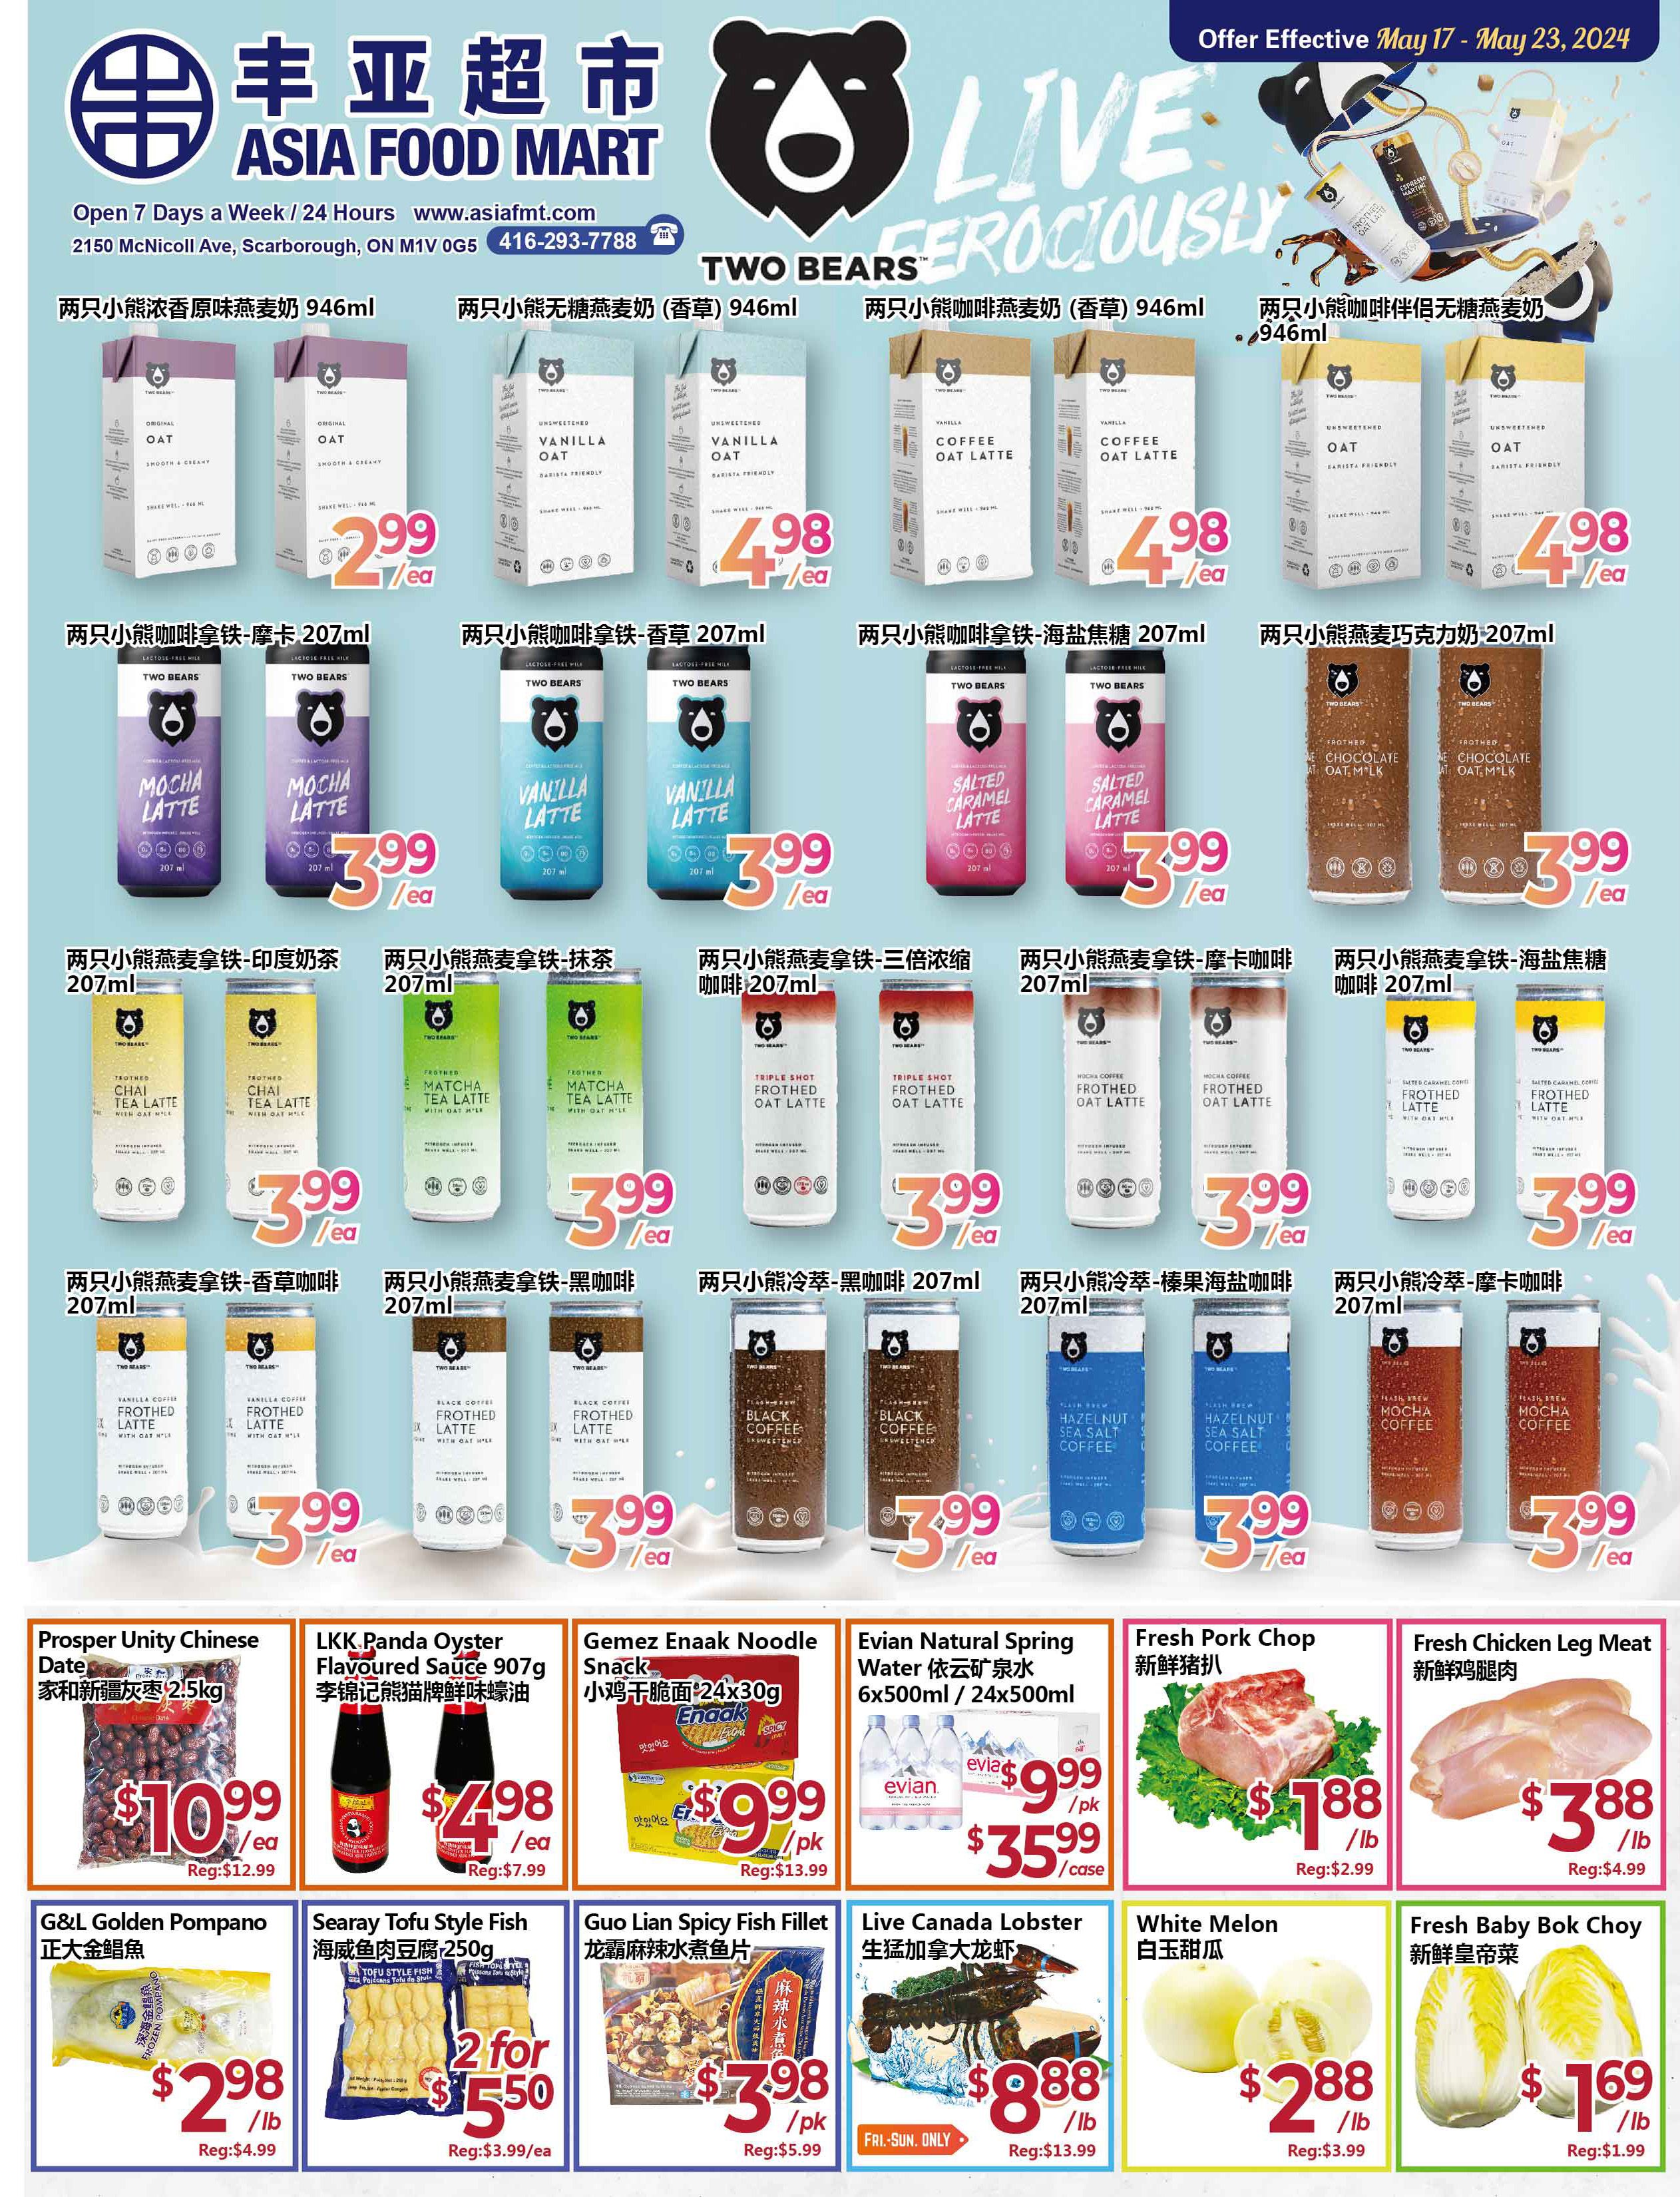 Asia Food Mart - Weekly Flyer Specials